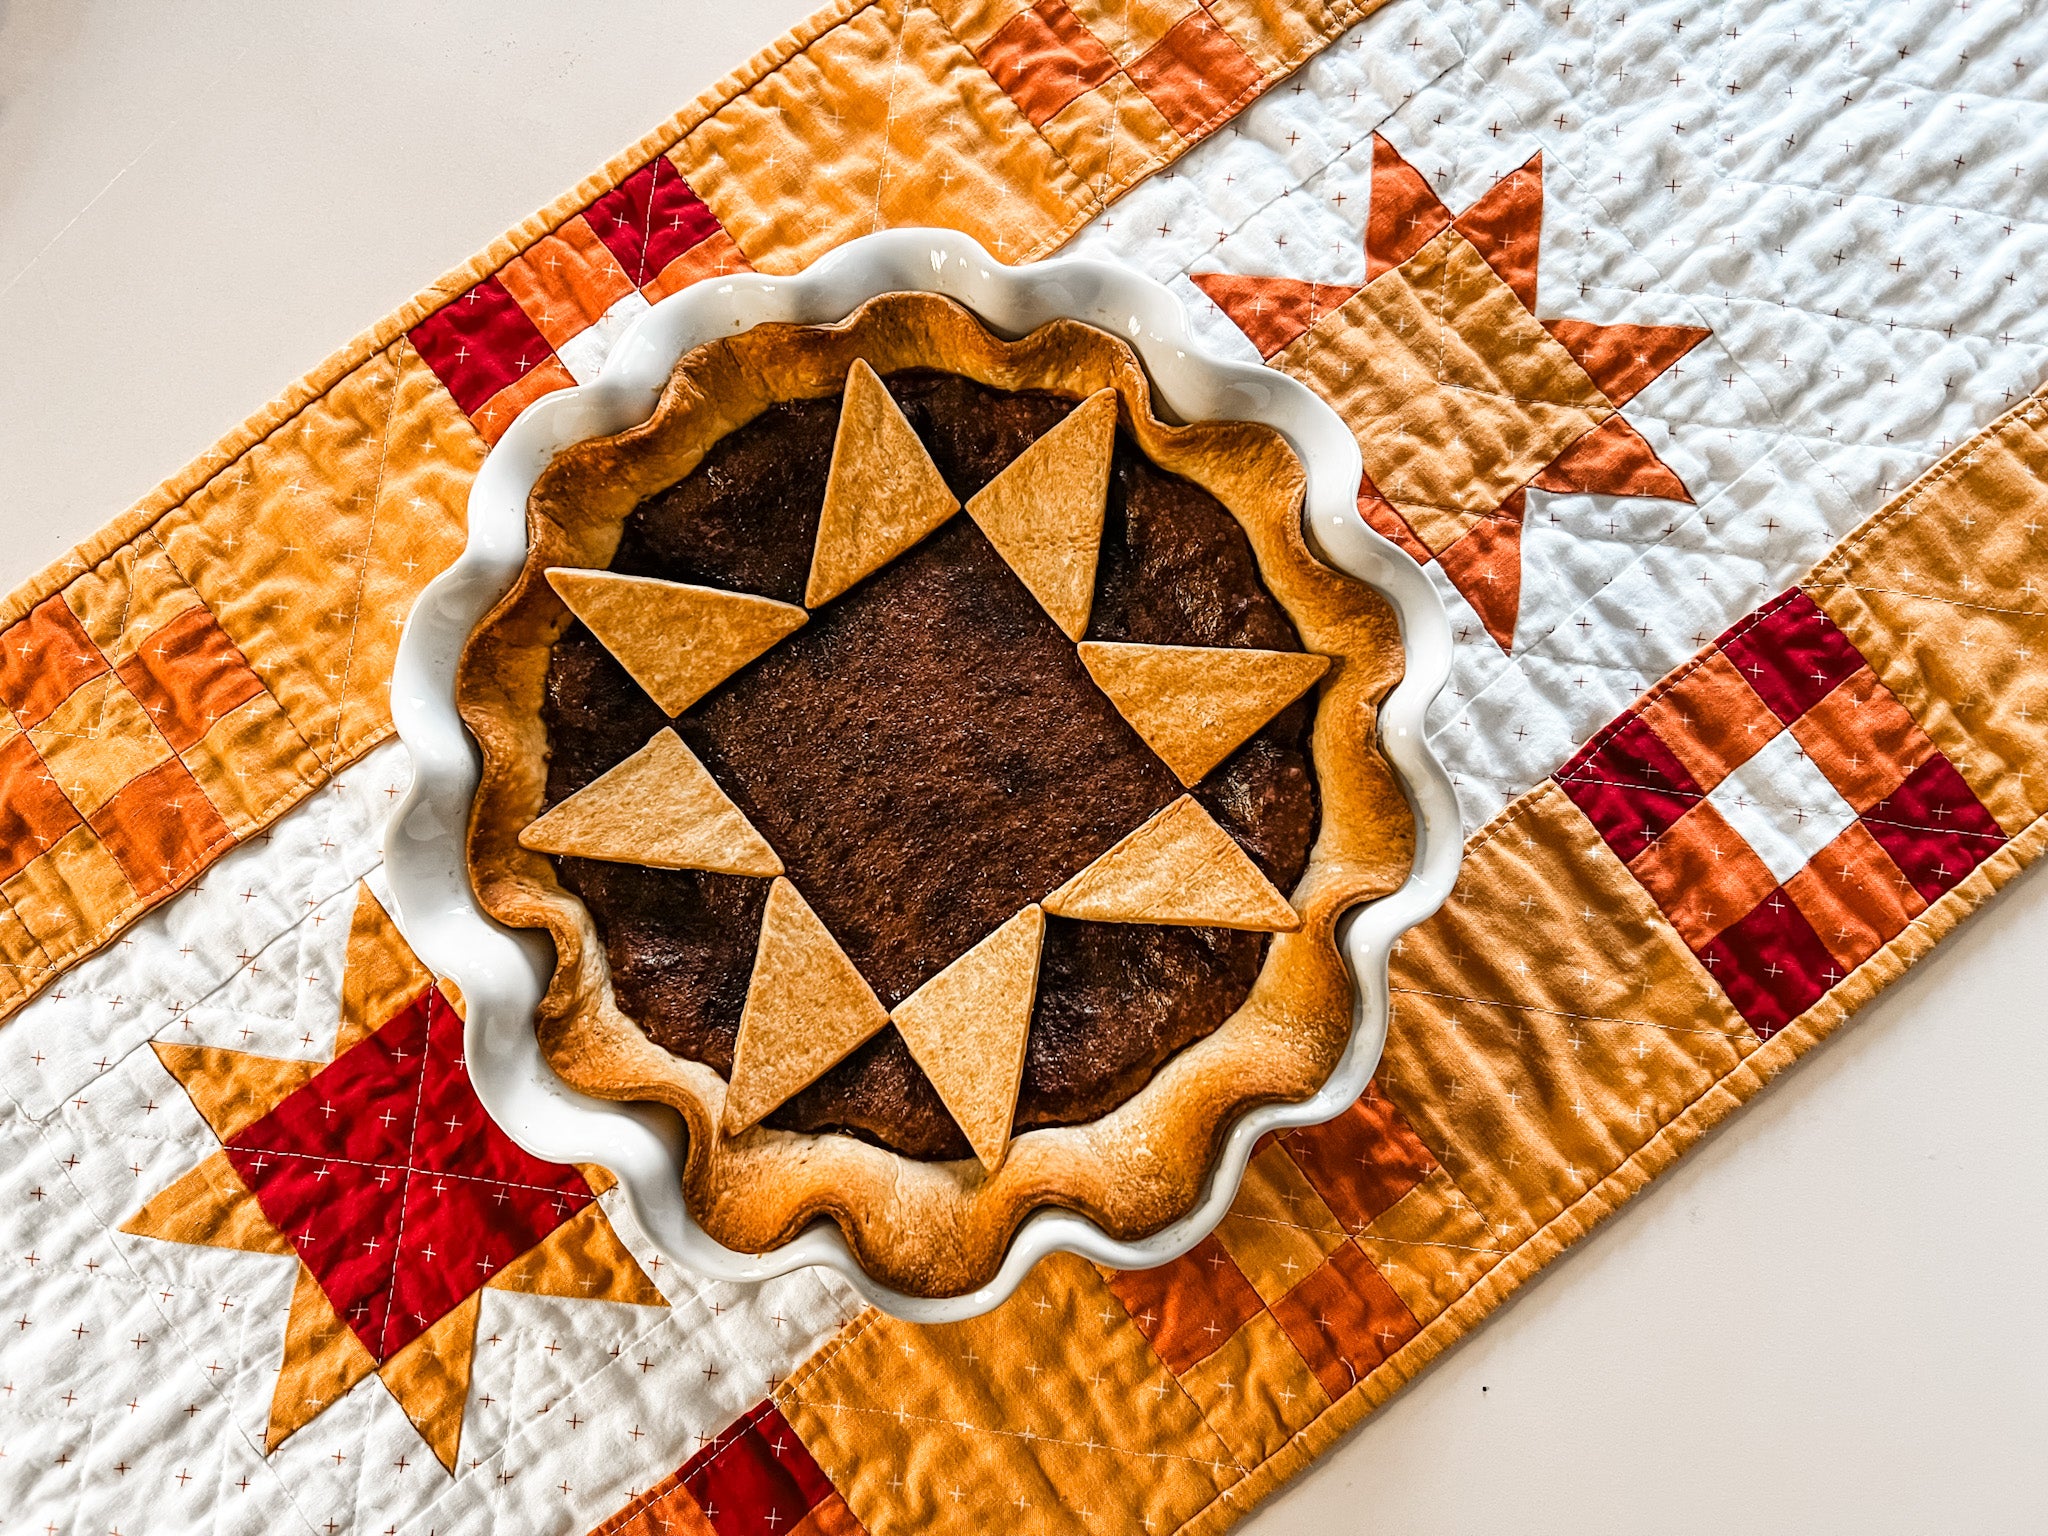 fudge pie with quilted top crust over pockets full of blessings quilted table runner